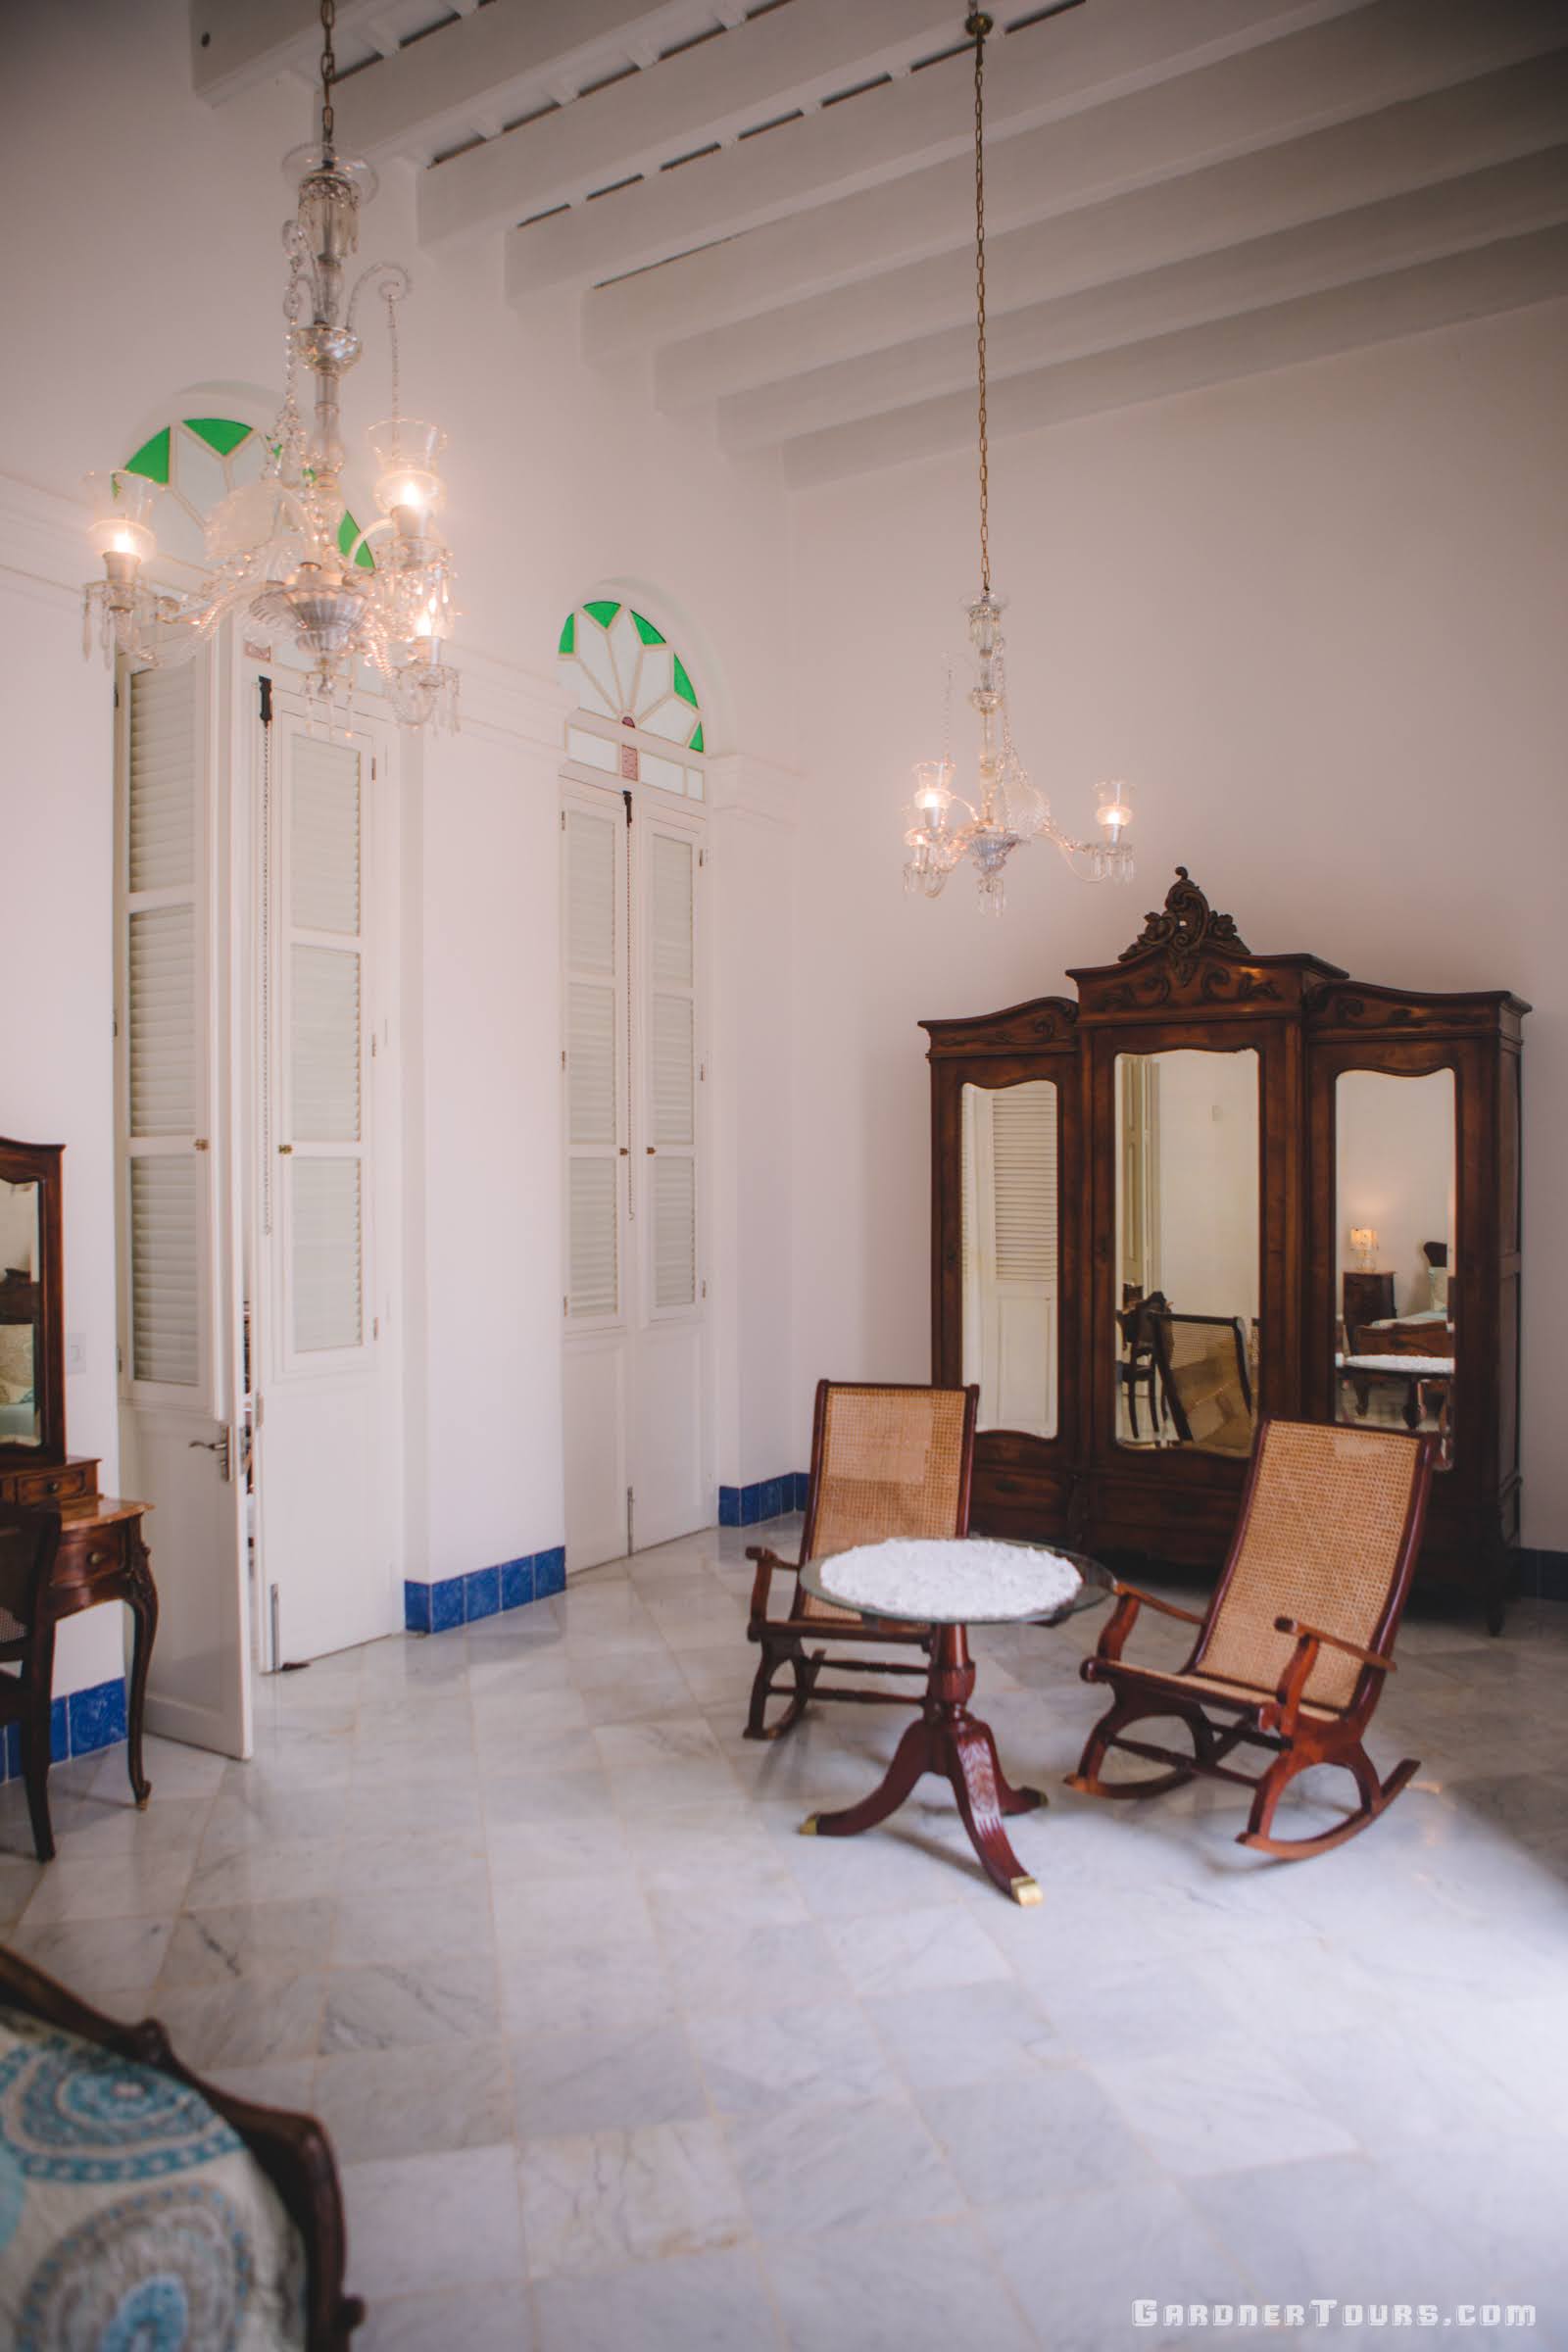 A 4-Star Luxury BnB with Original Floor Plan and Large Rooms in Old Havana, Cuba